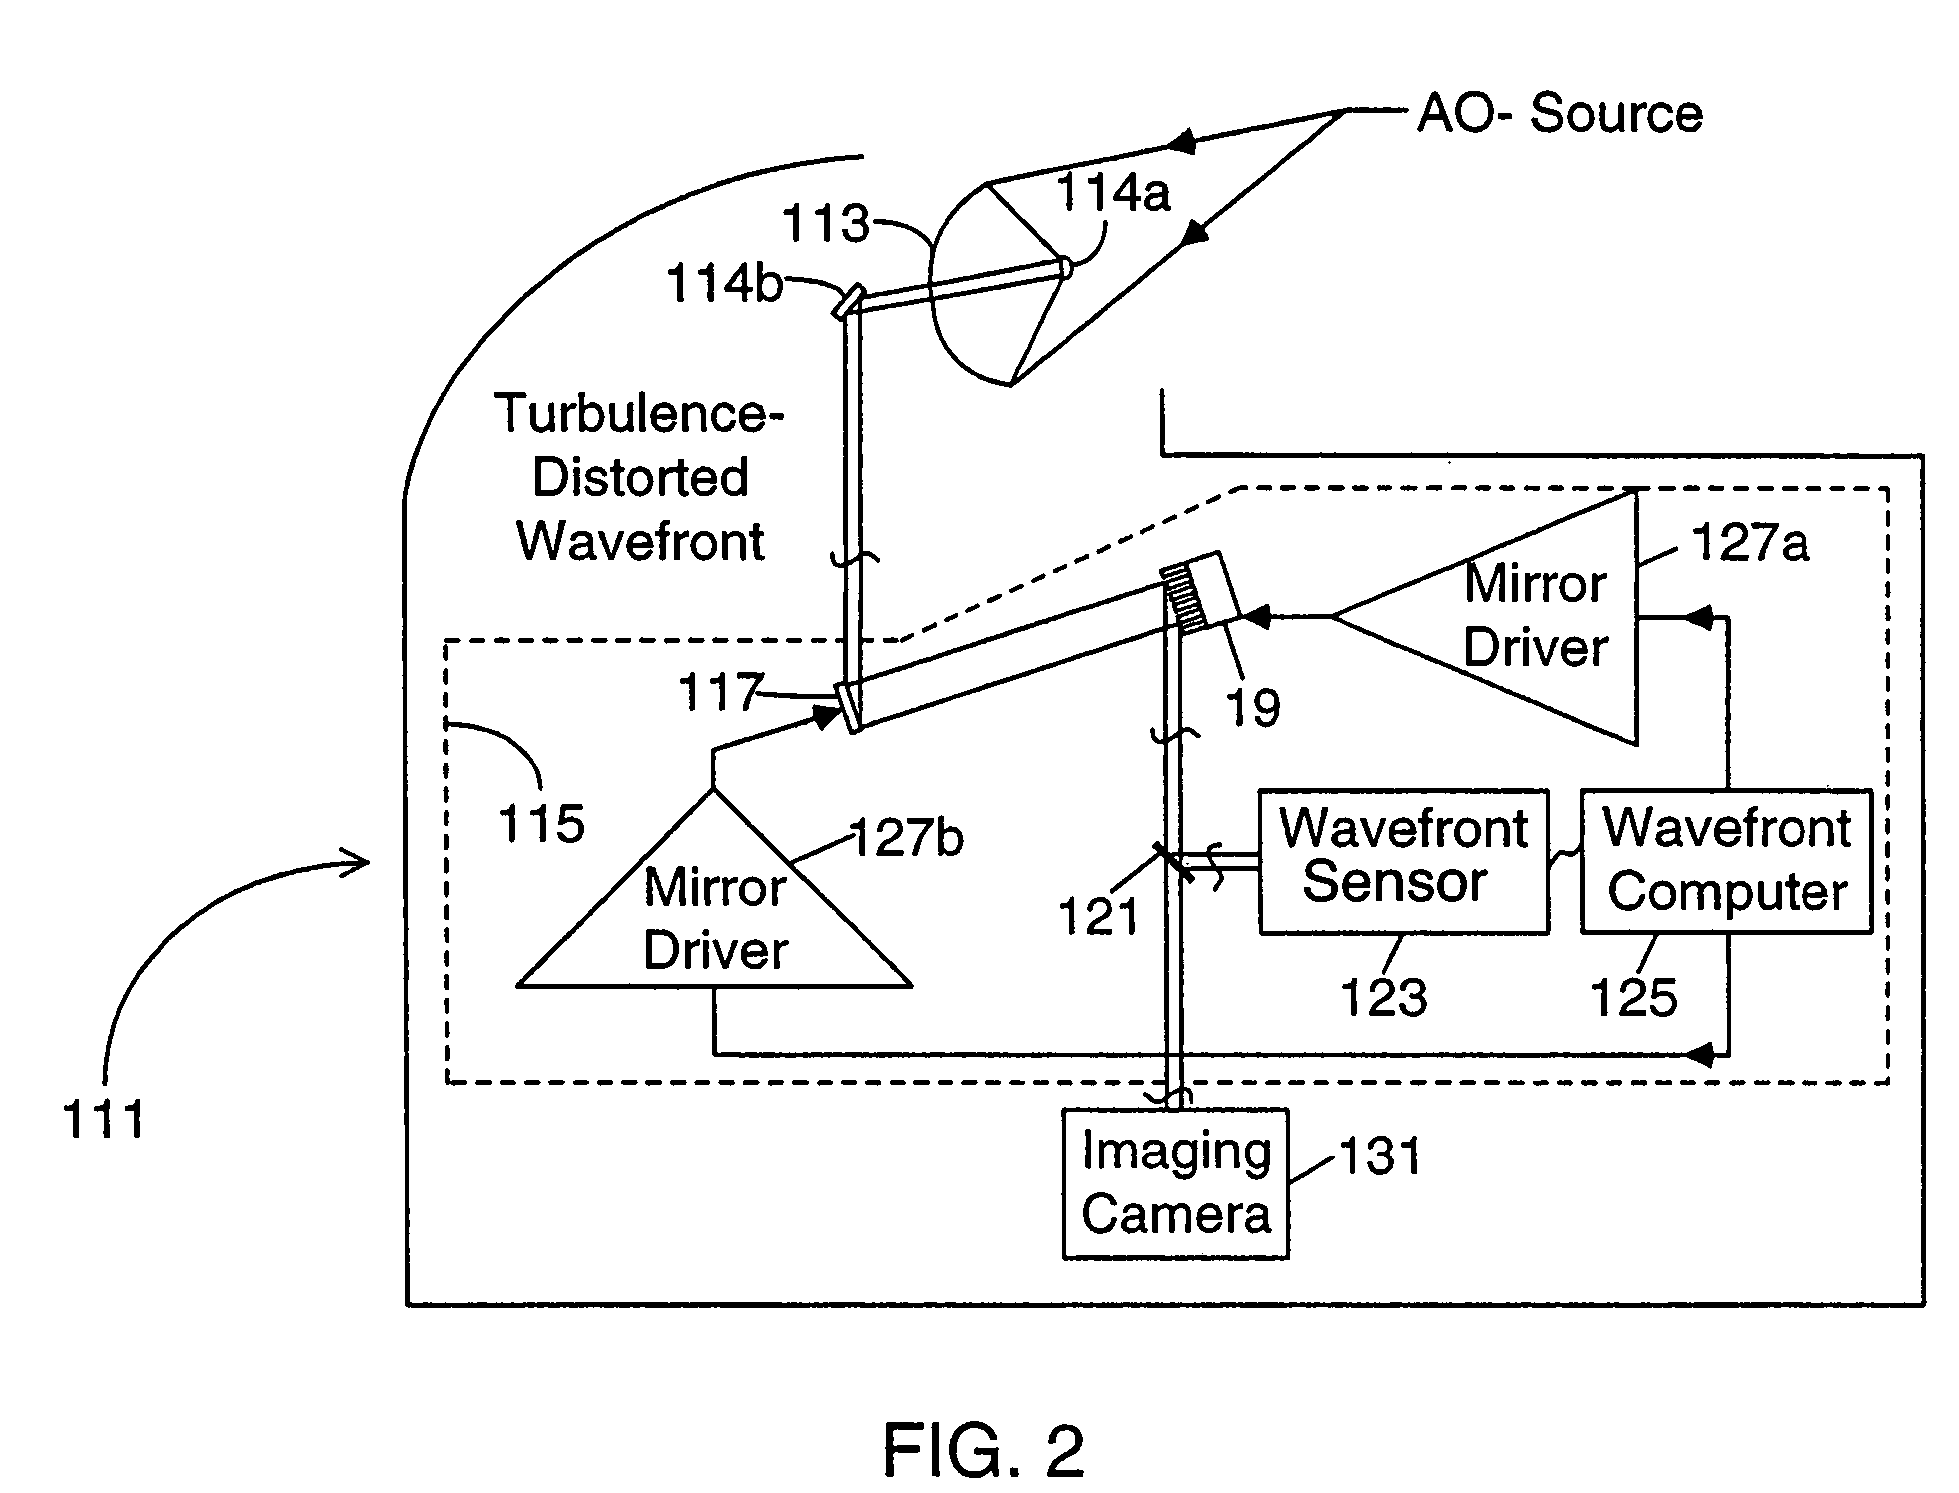 Optical instrument employing a wavefront sensor capable of coarse and fine phase measurement capabilities during first and second modes of operation